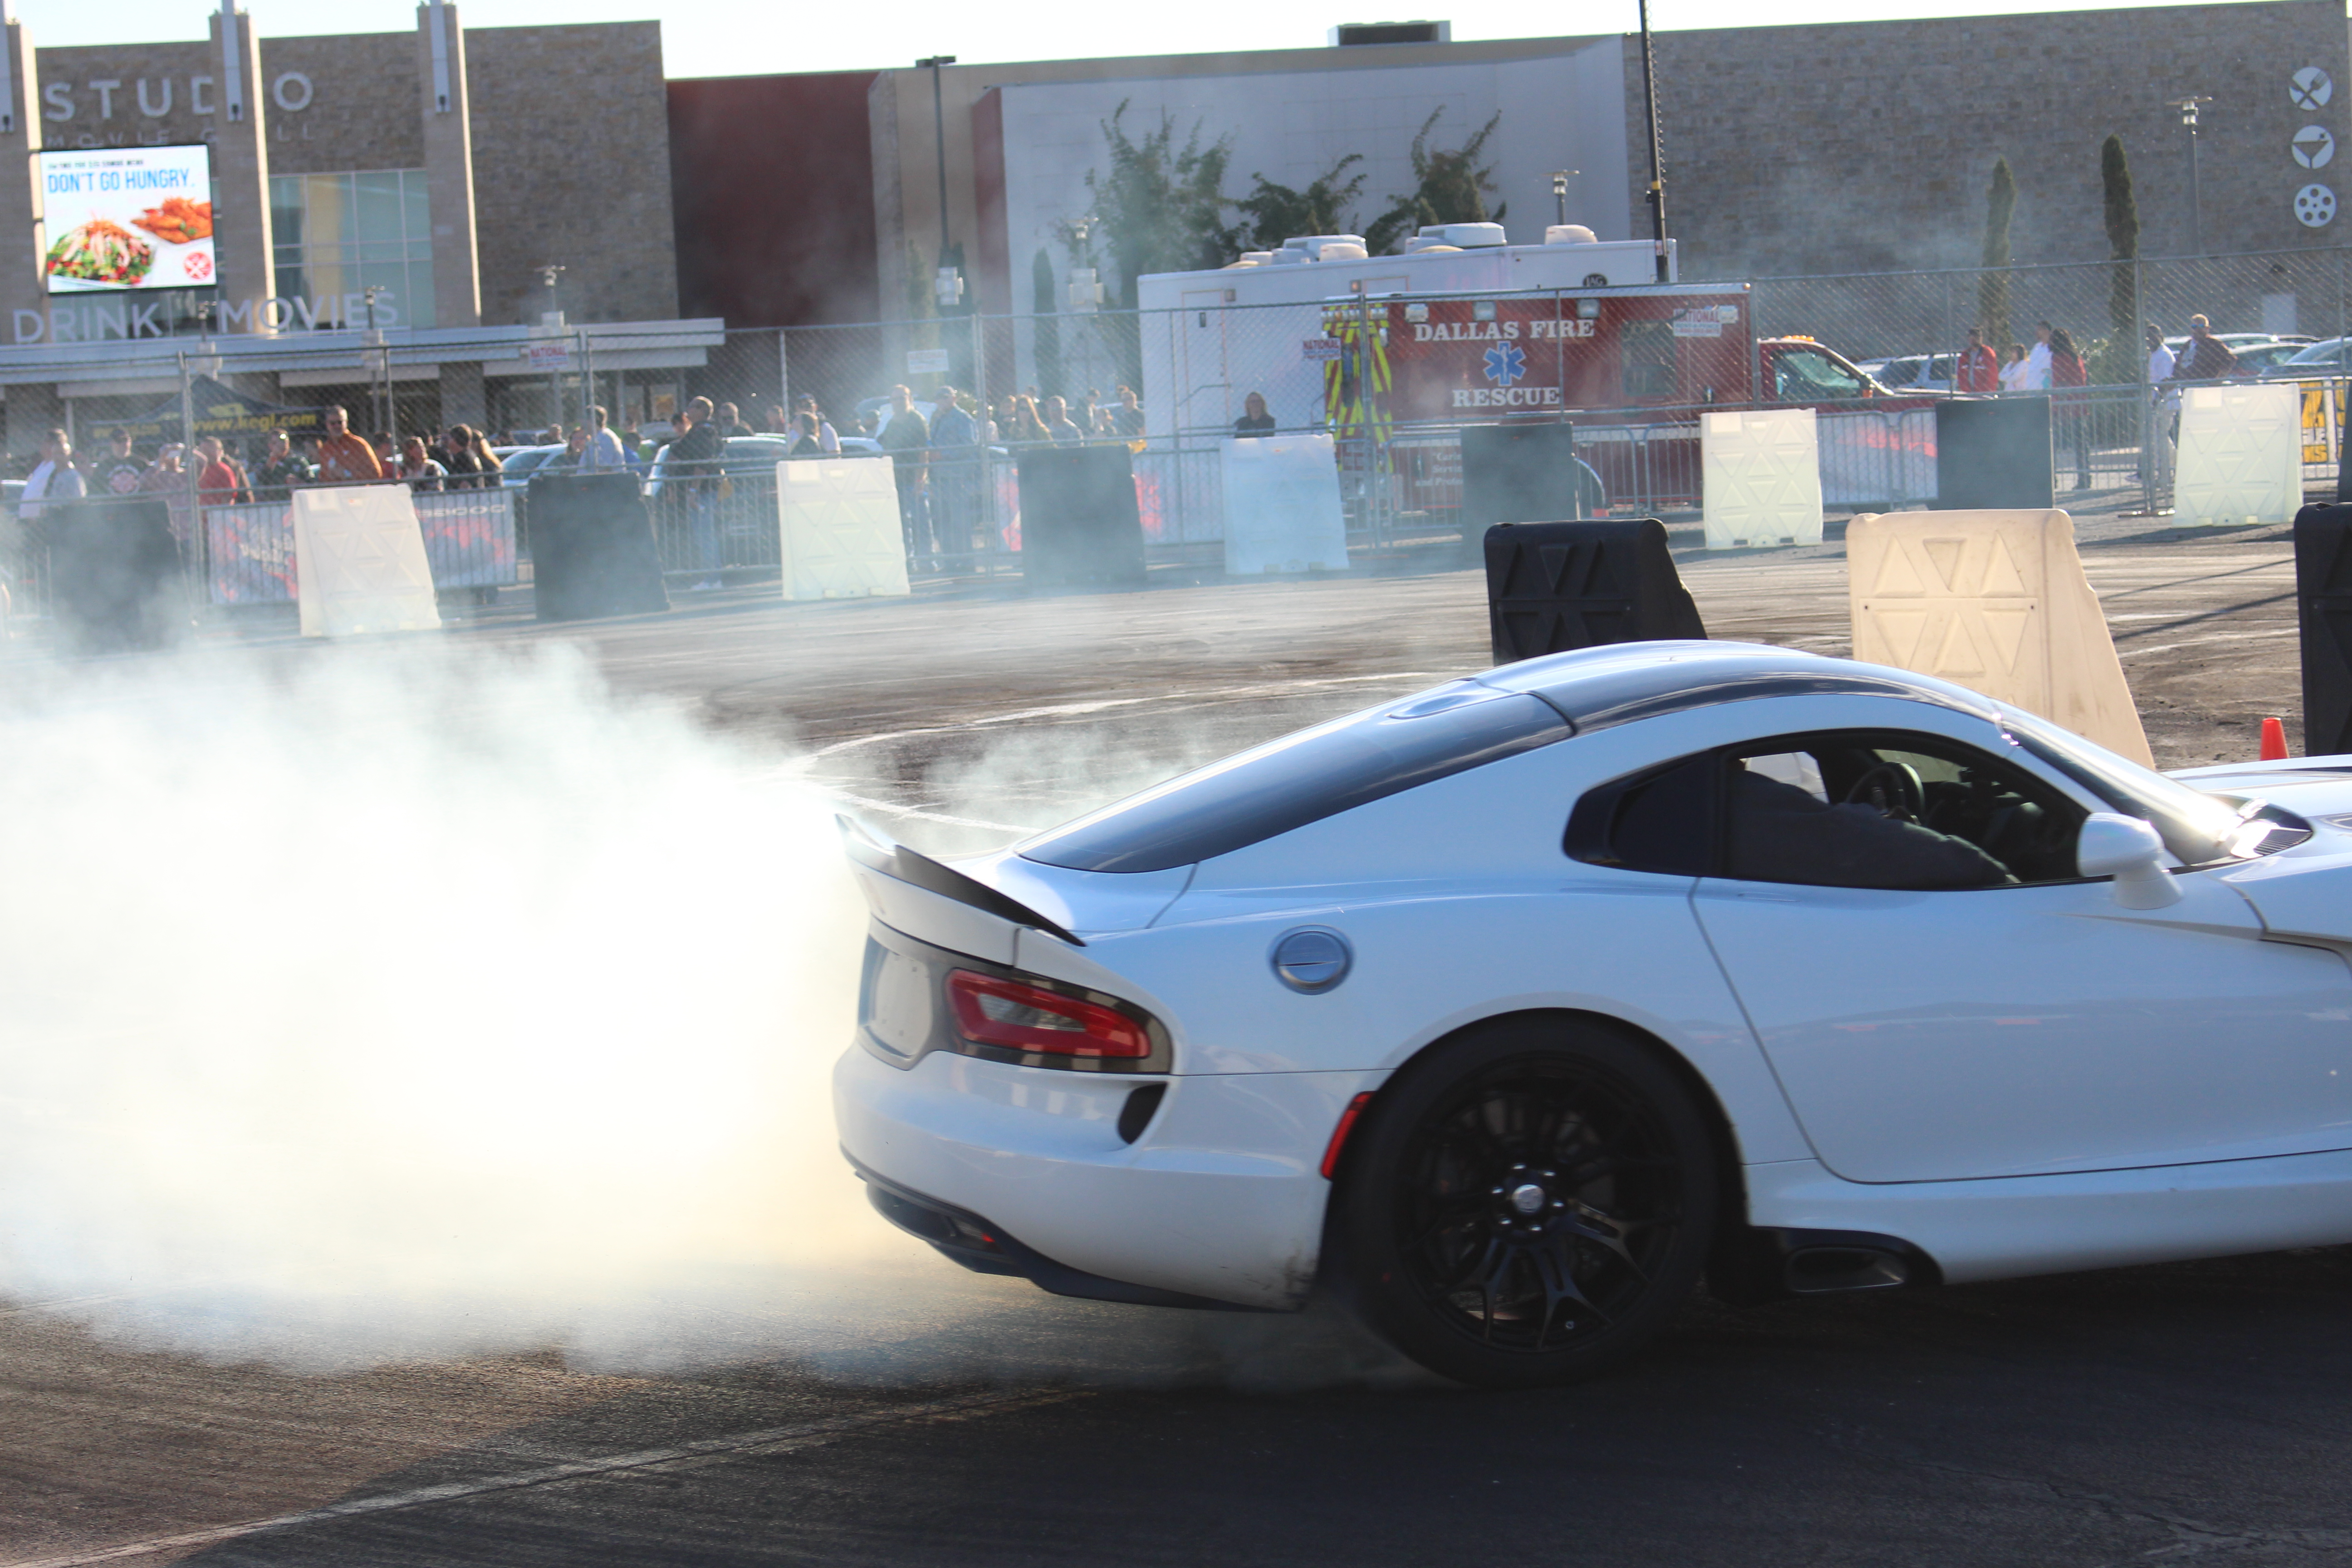 Full Throttle In The Fastest Cars In The World With @Dodge